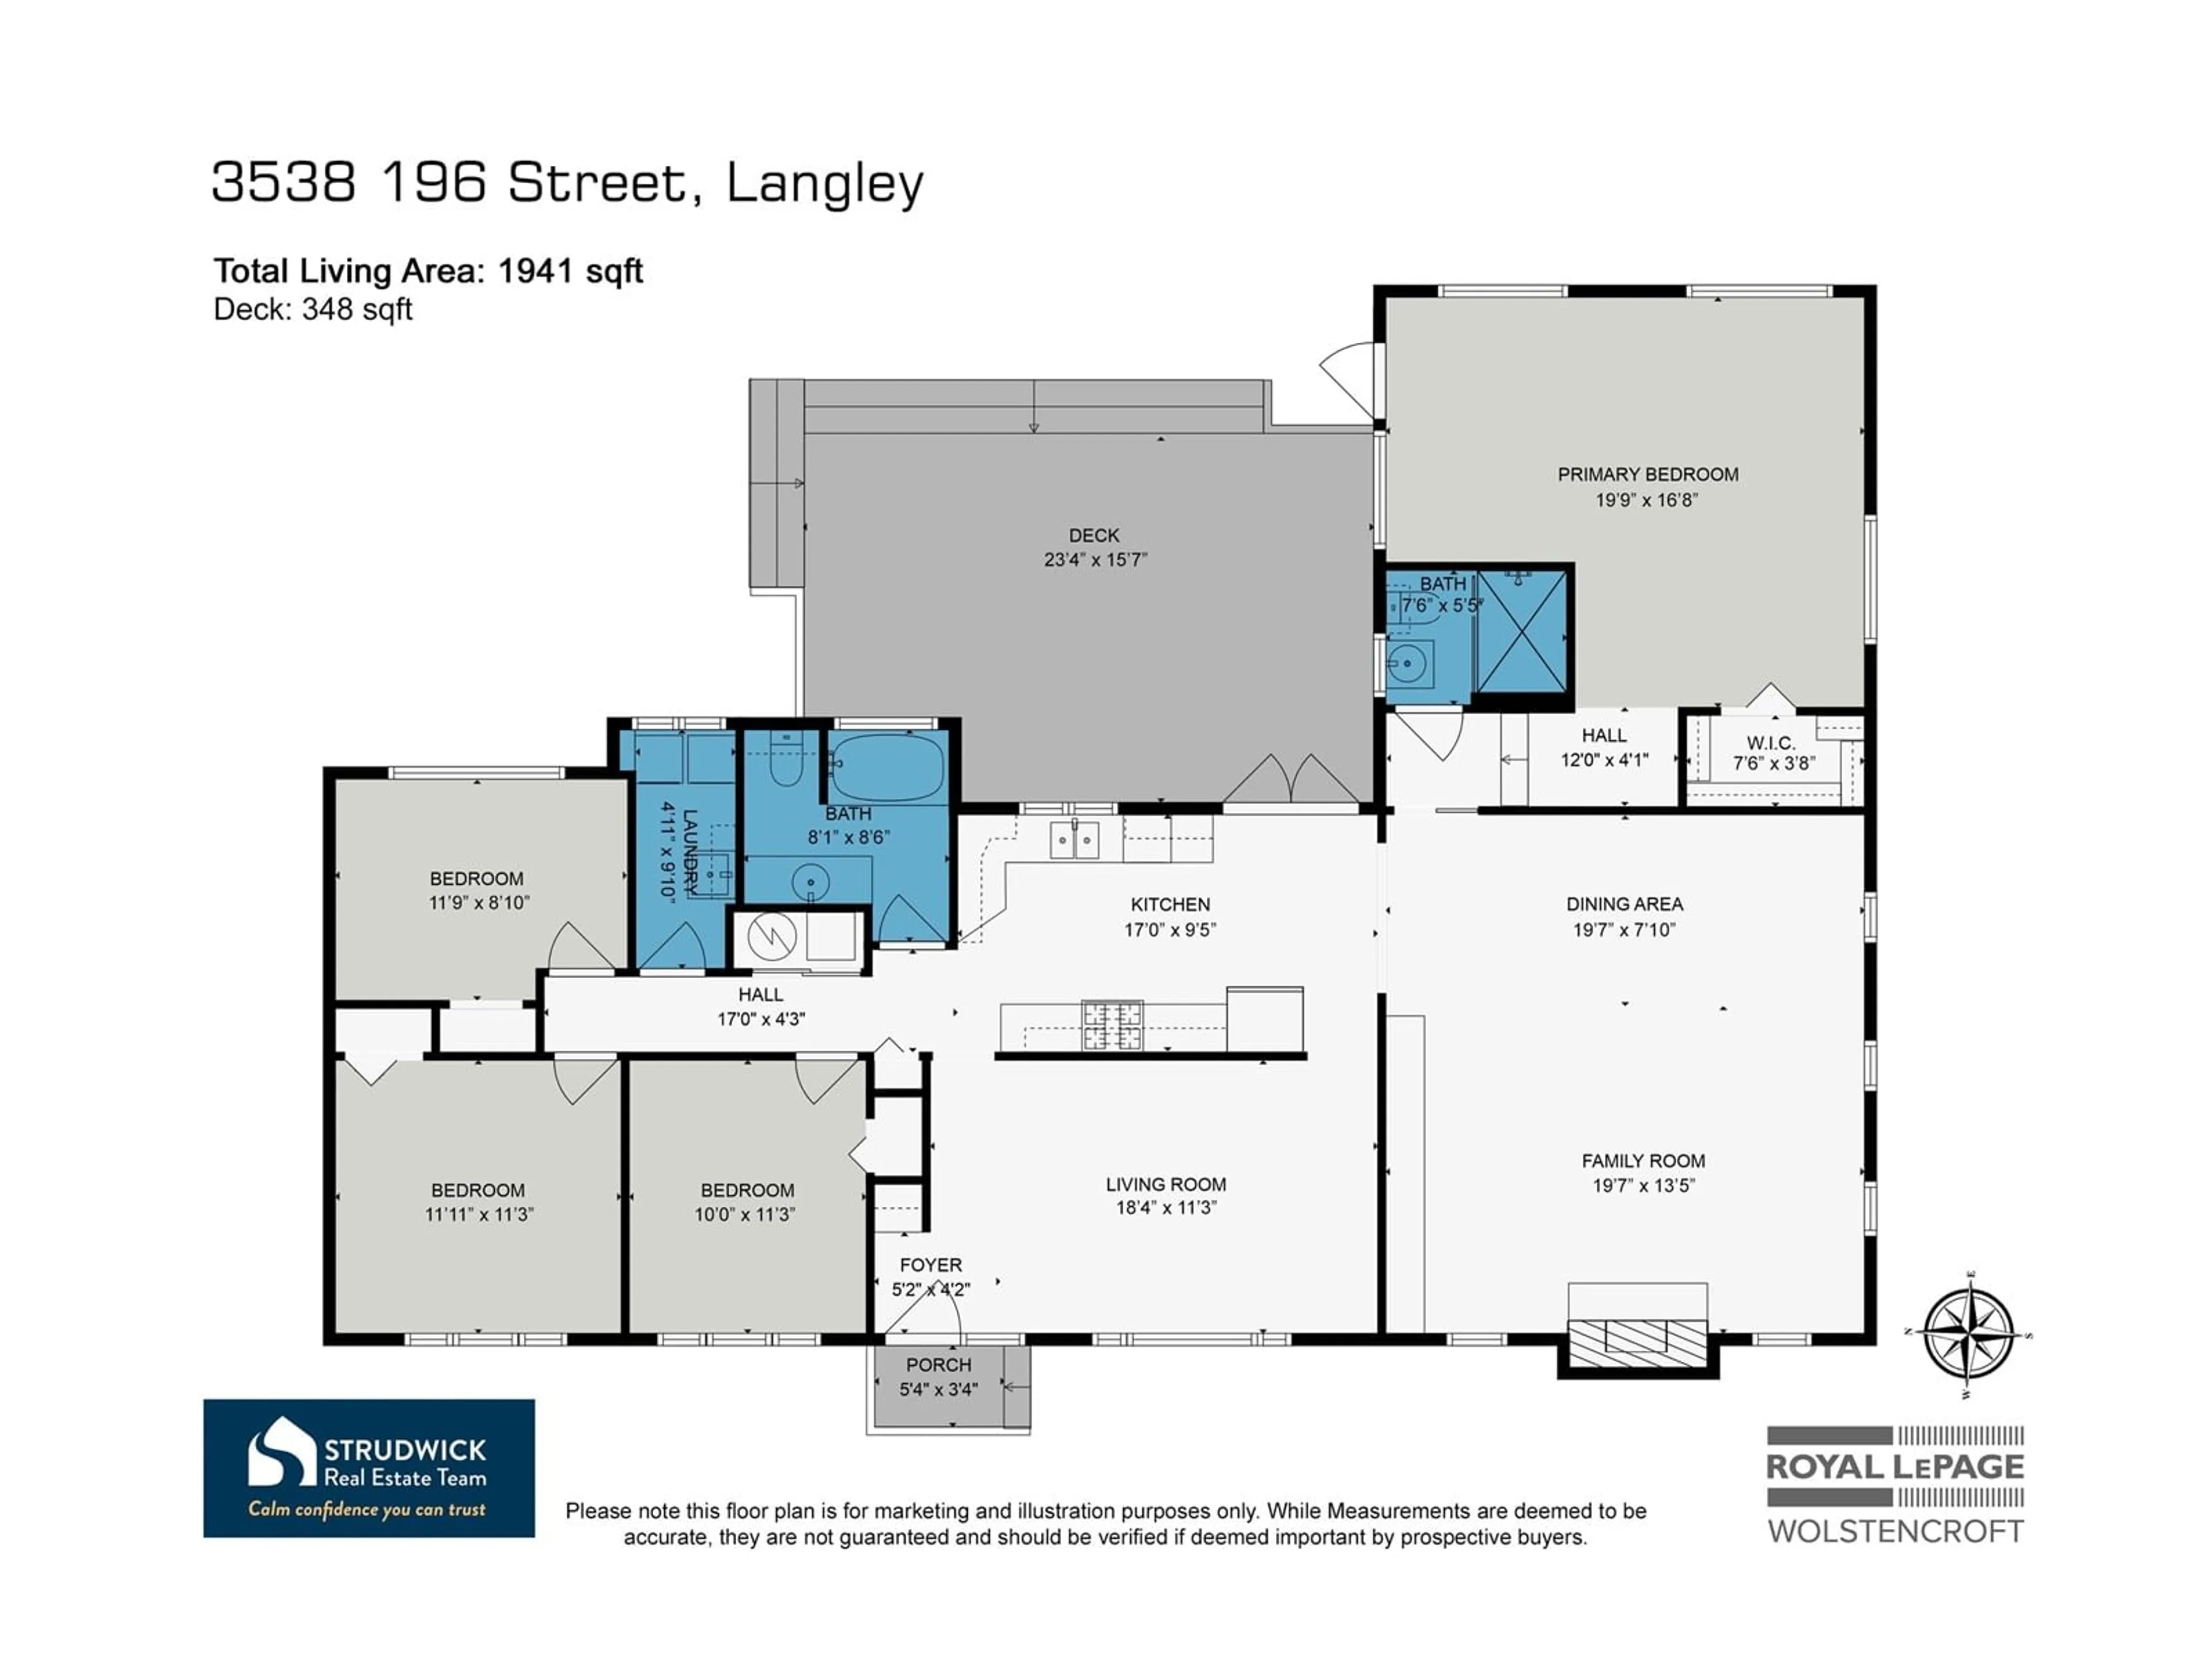 Floor plan for 3538 196 STREET, Langley British Columbia V3A4T7